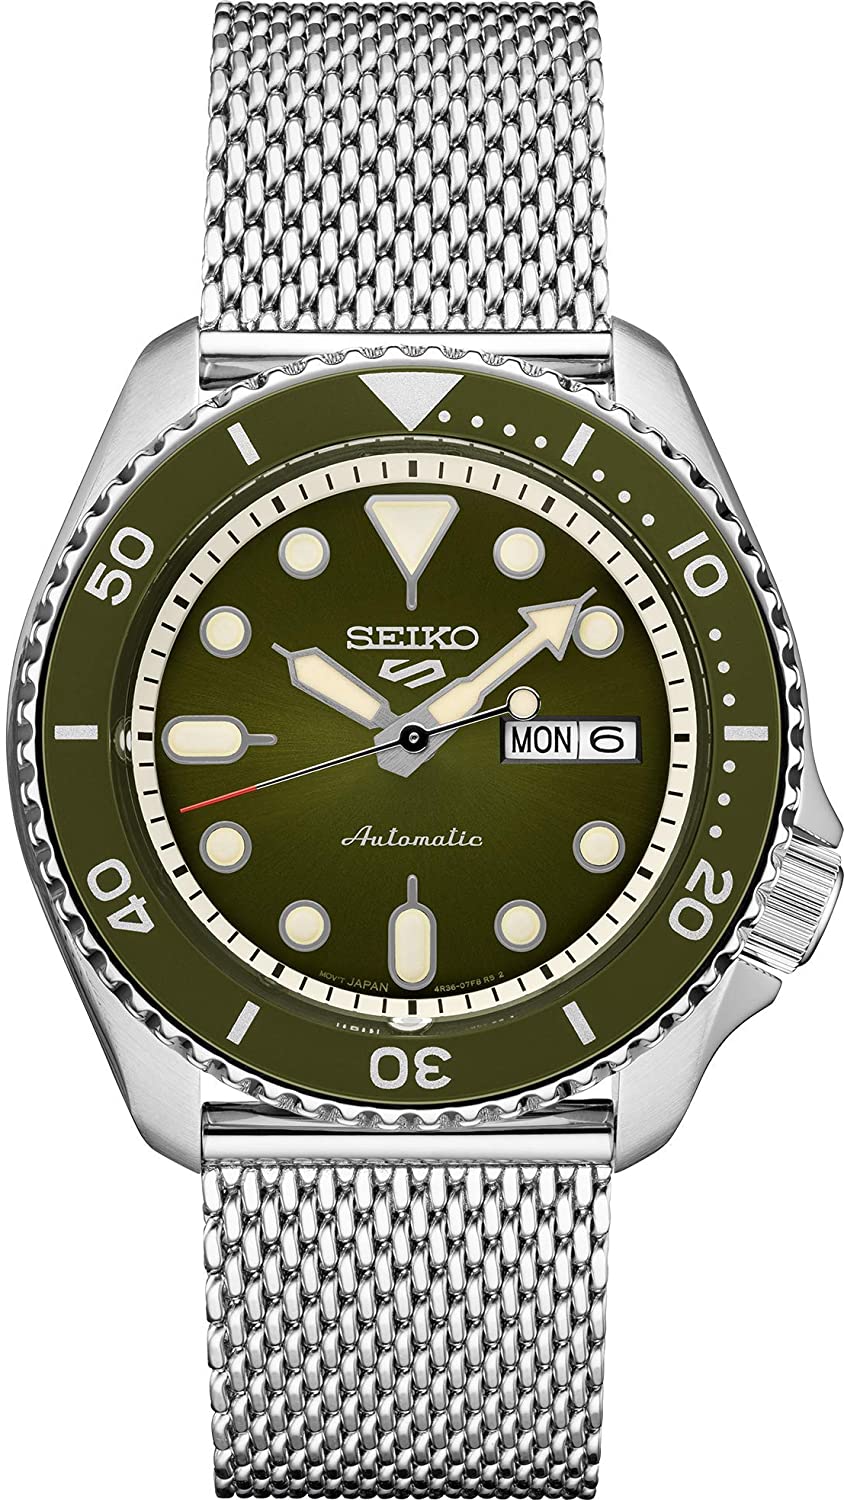 SEIKO 5 Sports Suits Stainless Steel Watch SRPD75K1